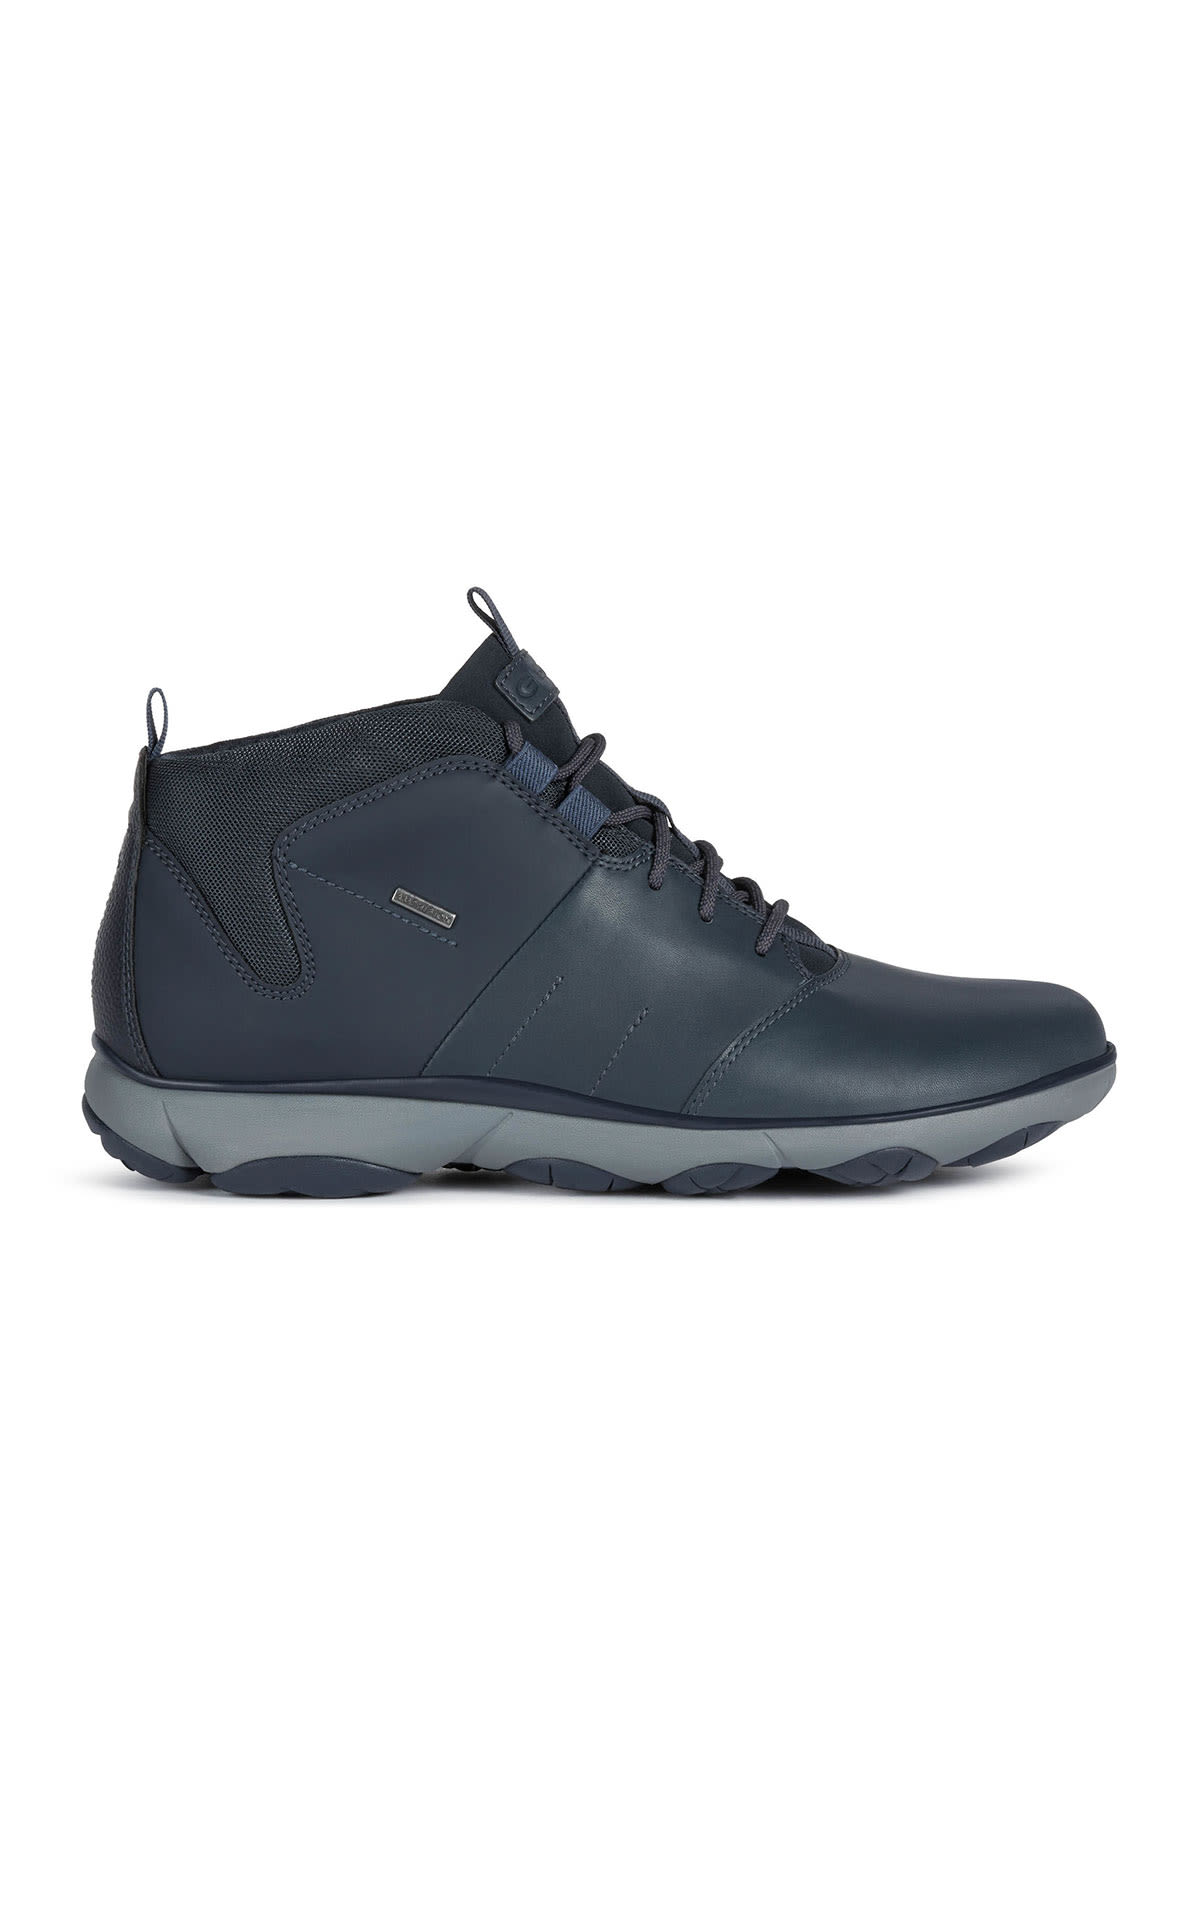 Men's navy blue leather boots Geox